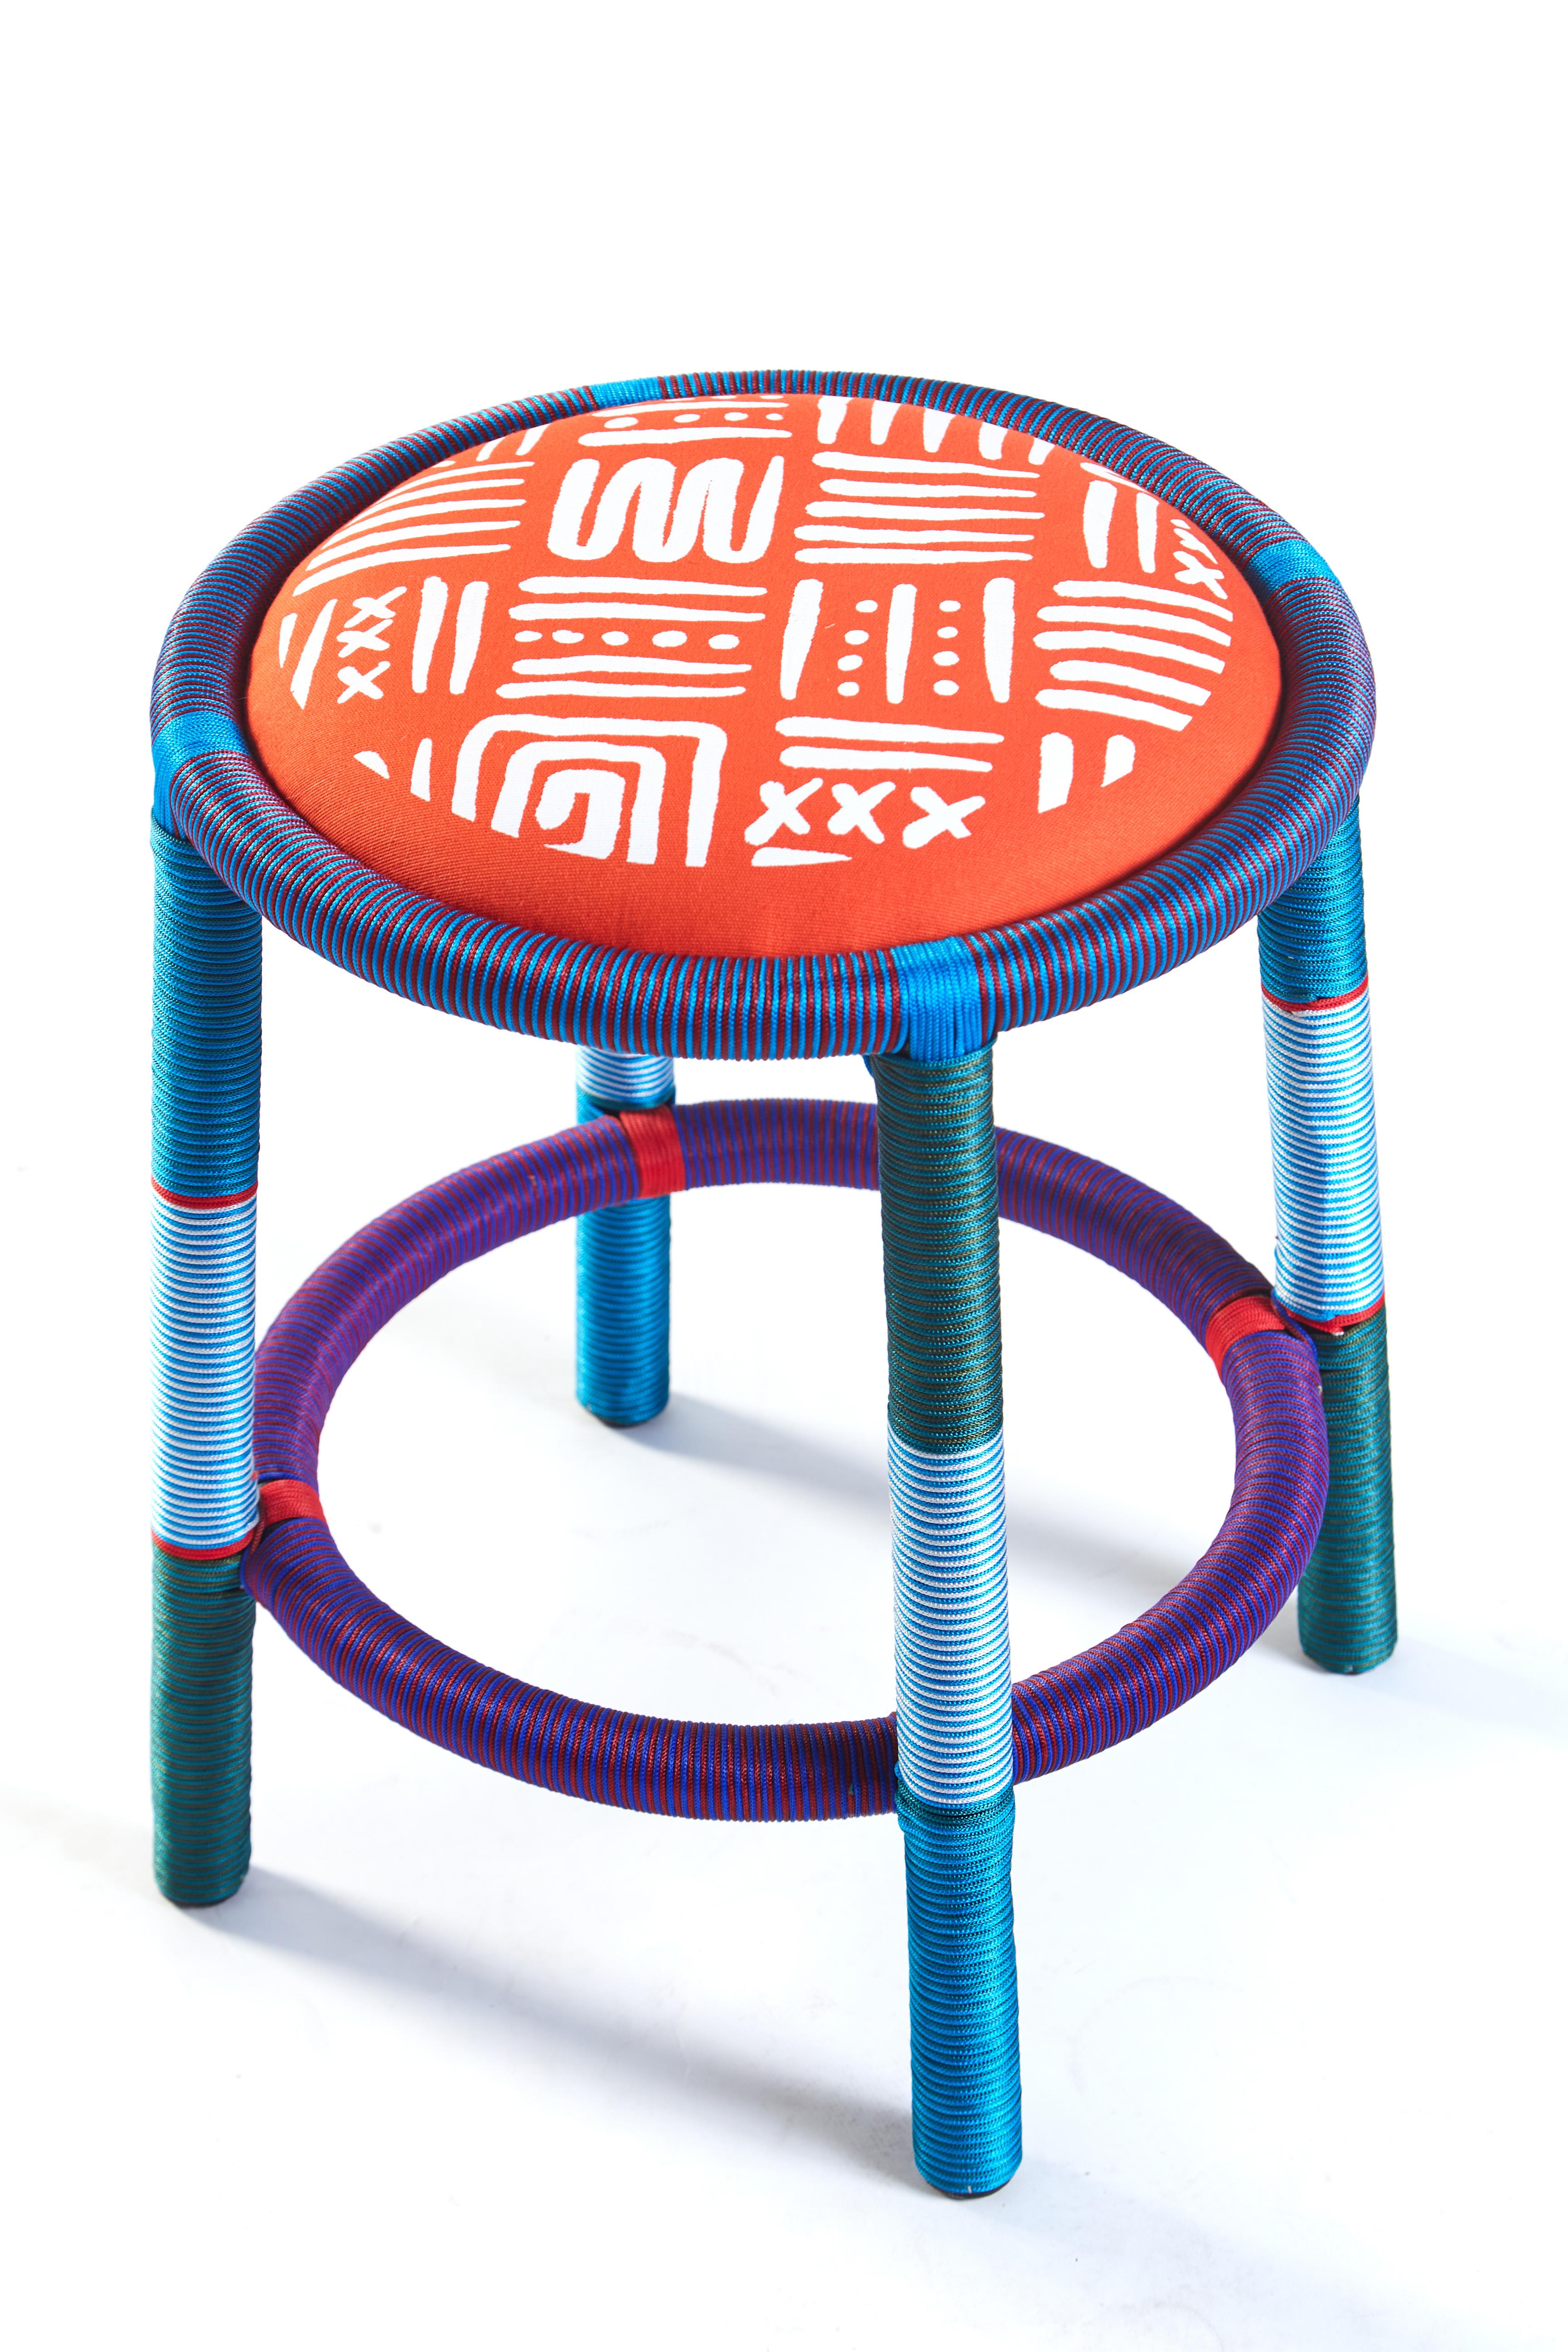 Sukpa was inspired by the simple structure of low stools often seen in Asian cultures. In Thailand, they can be found everywhere with various ways of simple construction and materials that meet the user’s needs. 

Thais traditionally hand wash